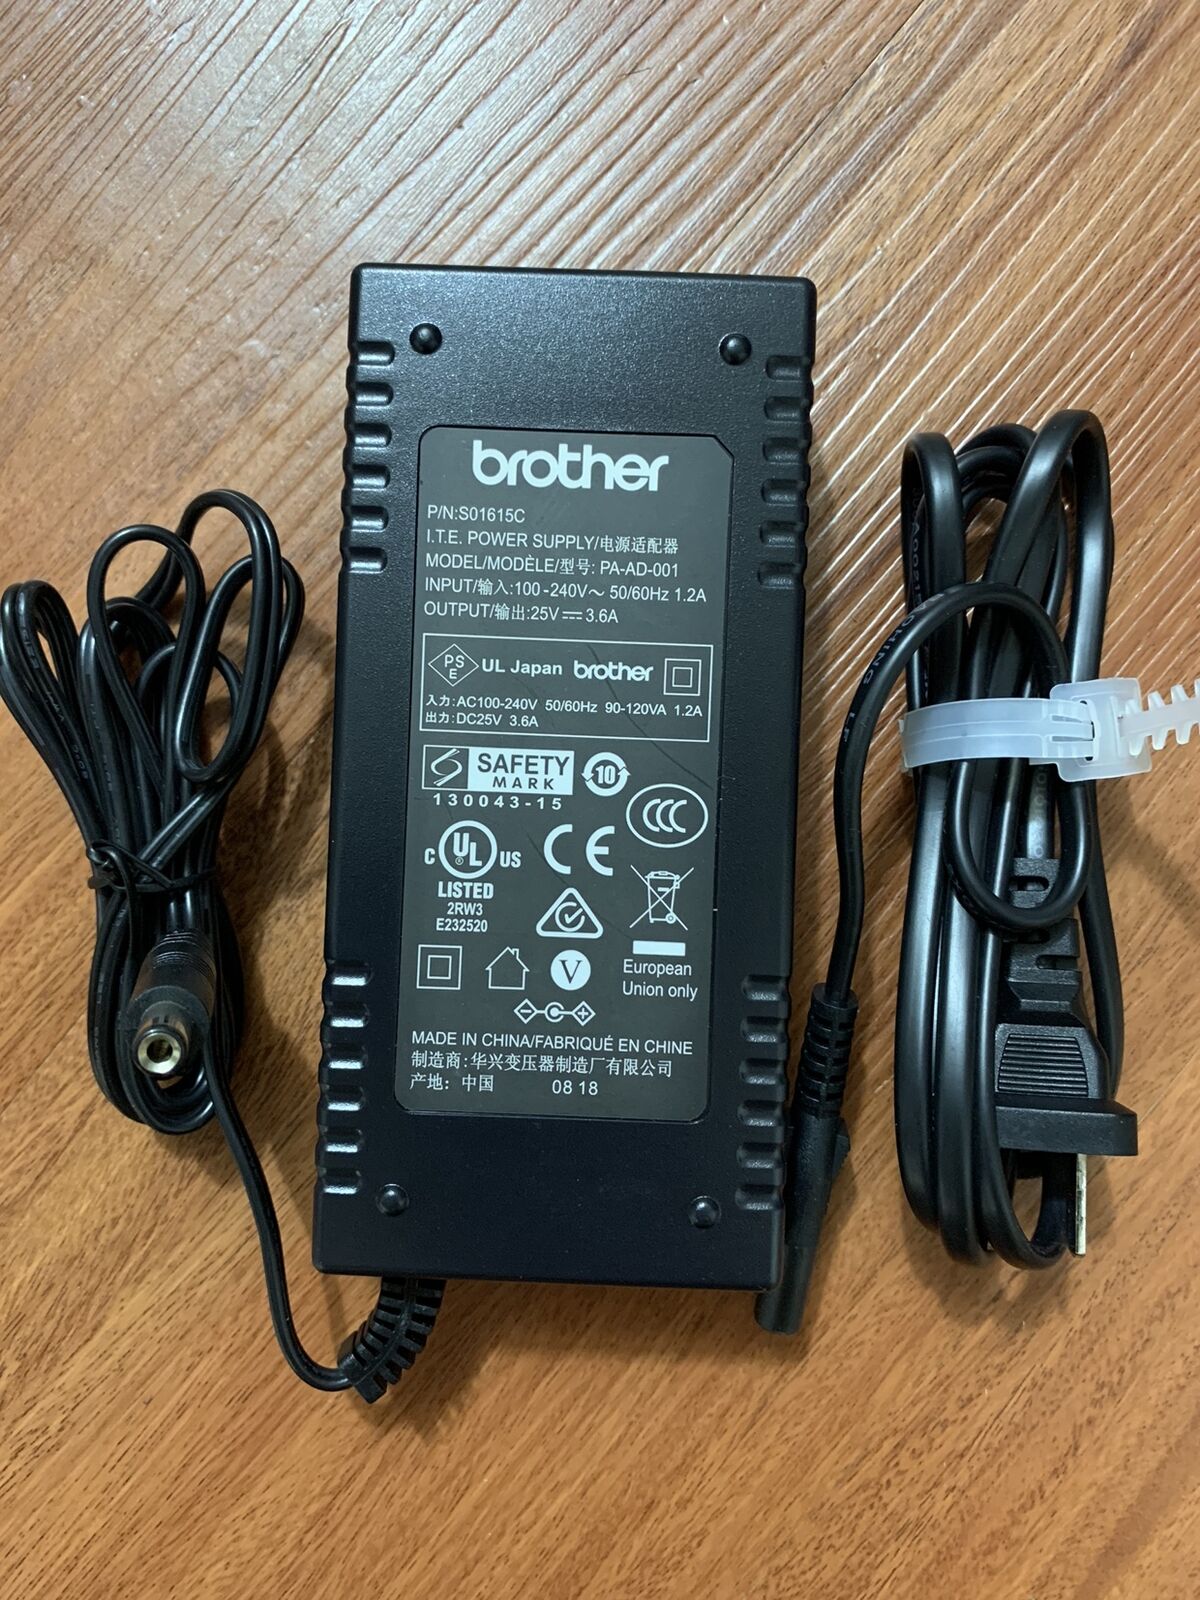 Genuine Brother AC Adapter for Brother PA-AD-001 Label Printer Power Charger Brand: Brother Type: AC/Standard Color: